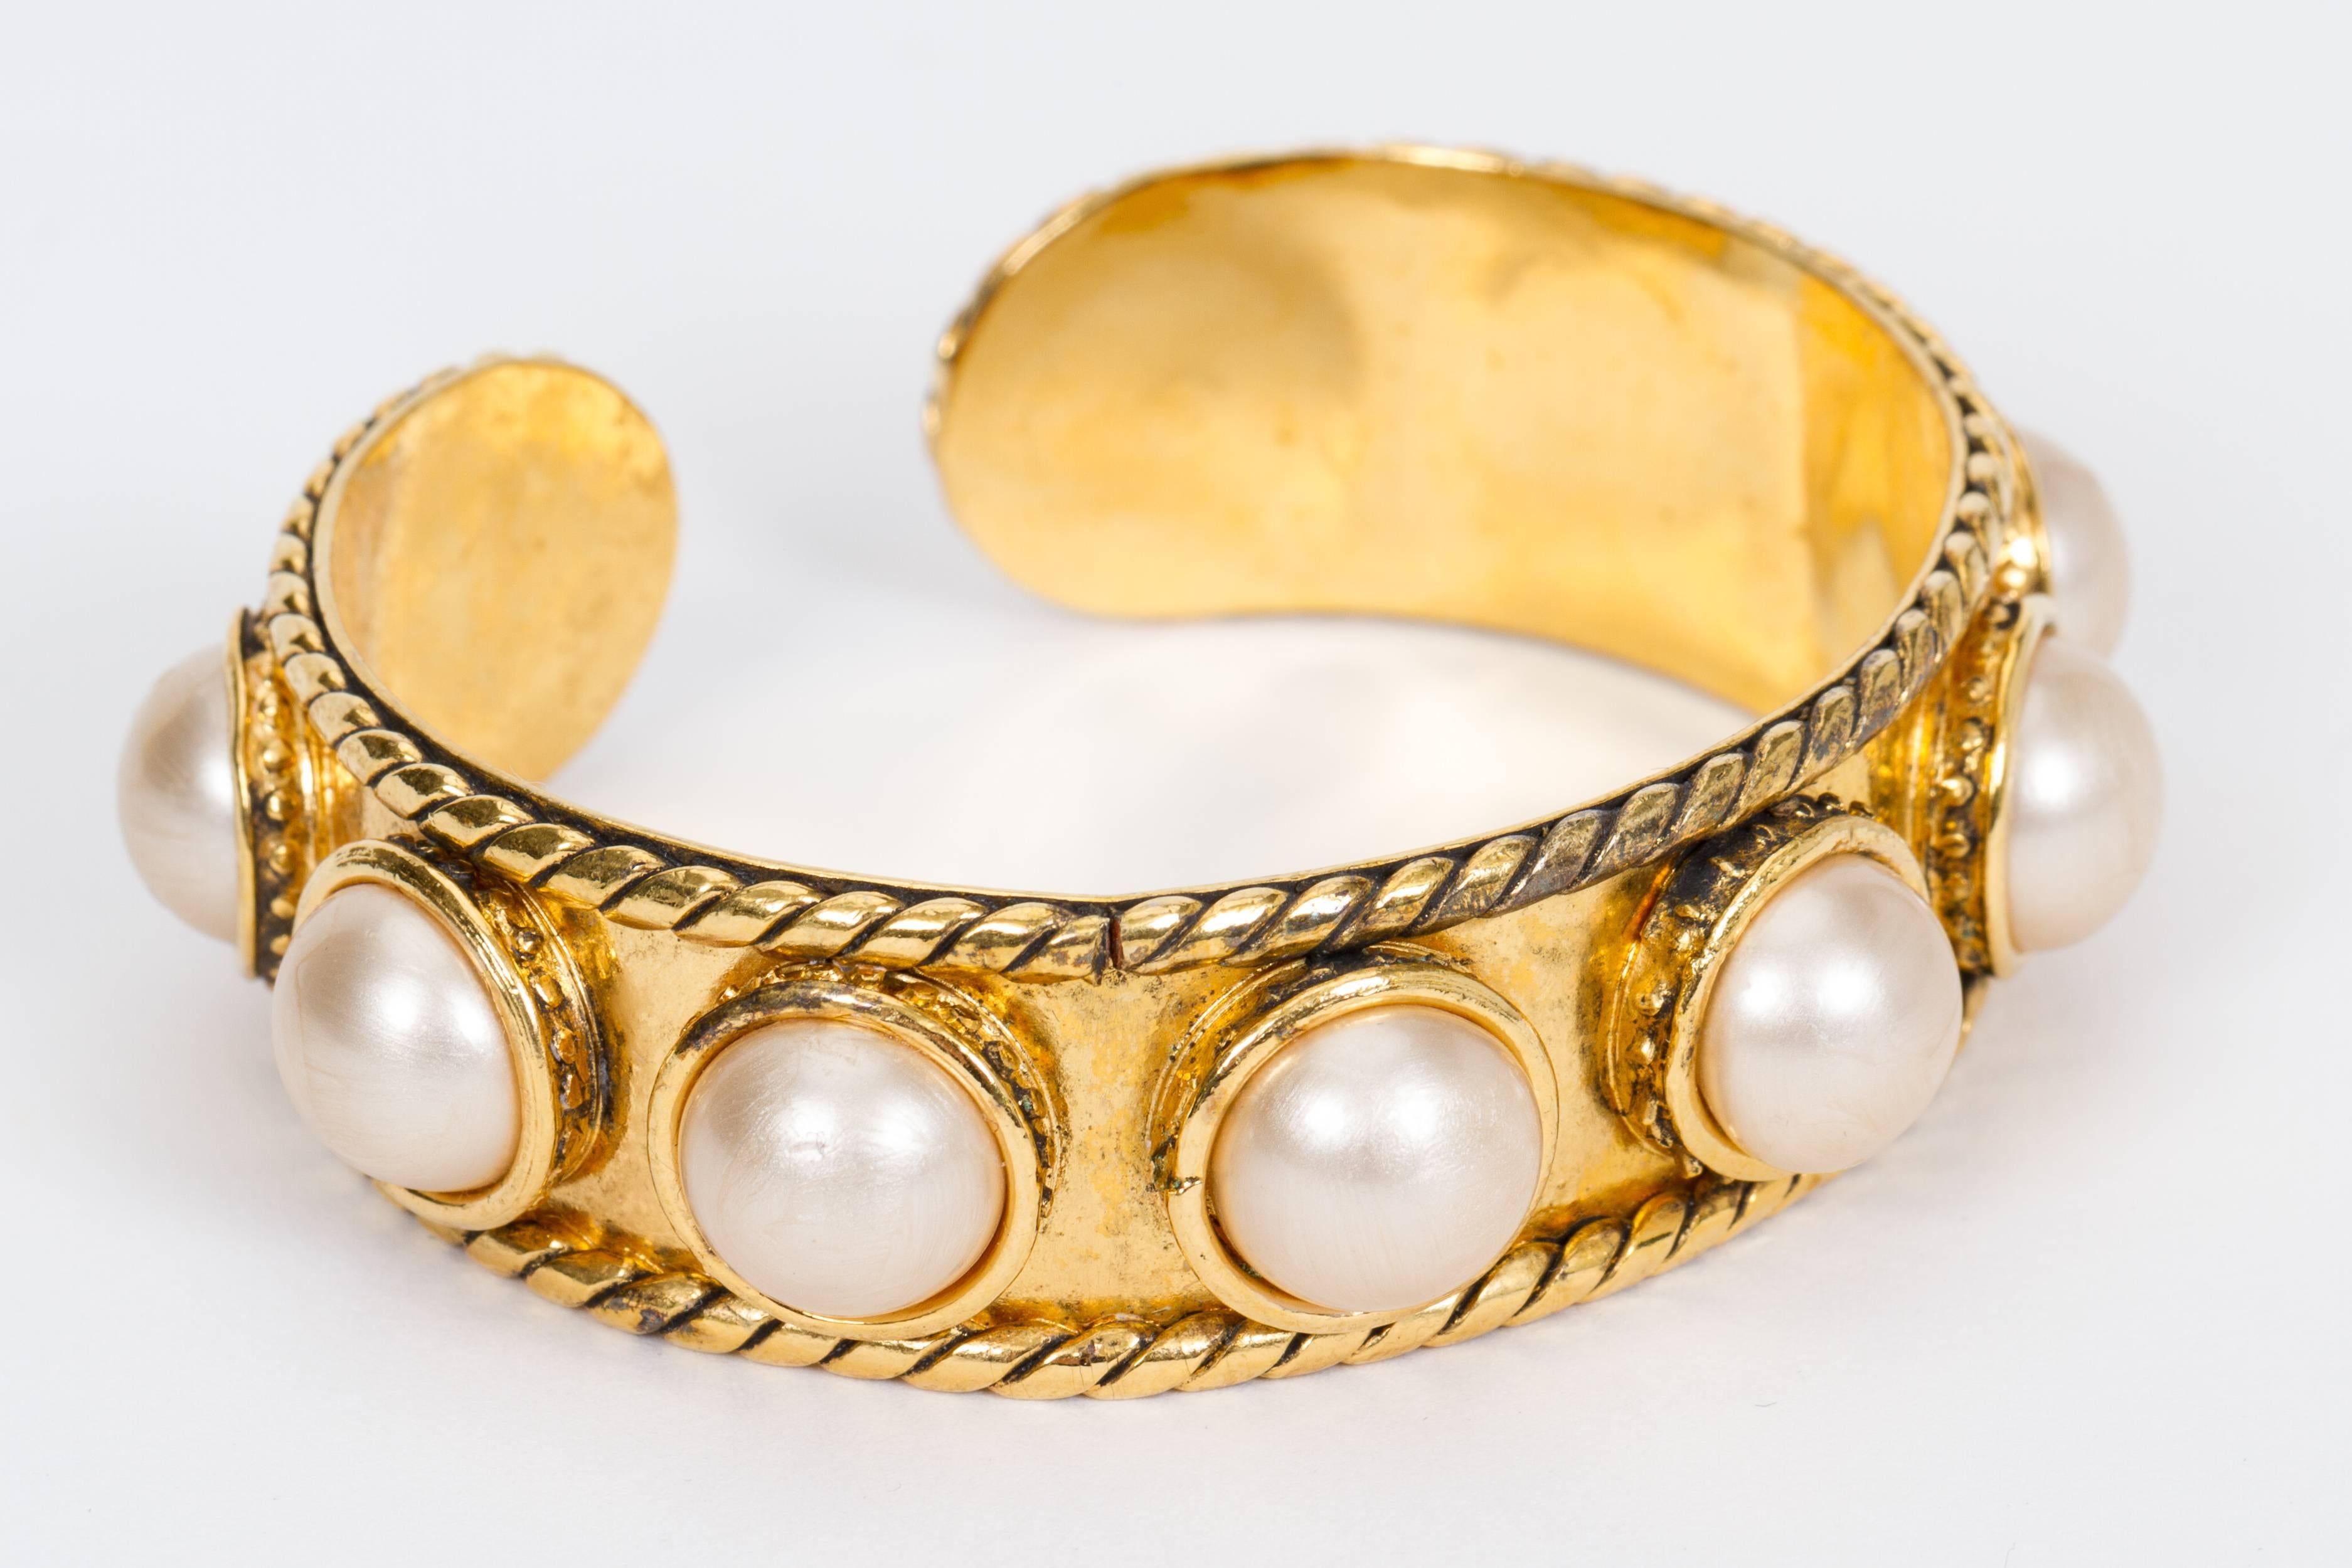 Chanel late 80's shiny gold and faux pearls cuff bracelet. Cuff opening 7/8. Fits a small to medium arm. Comes with original box.
